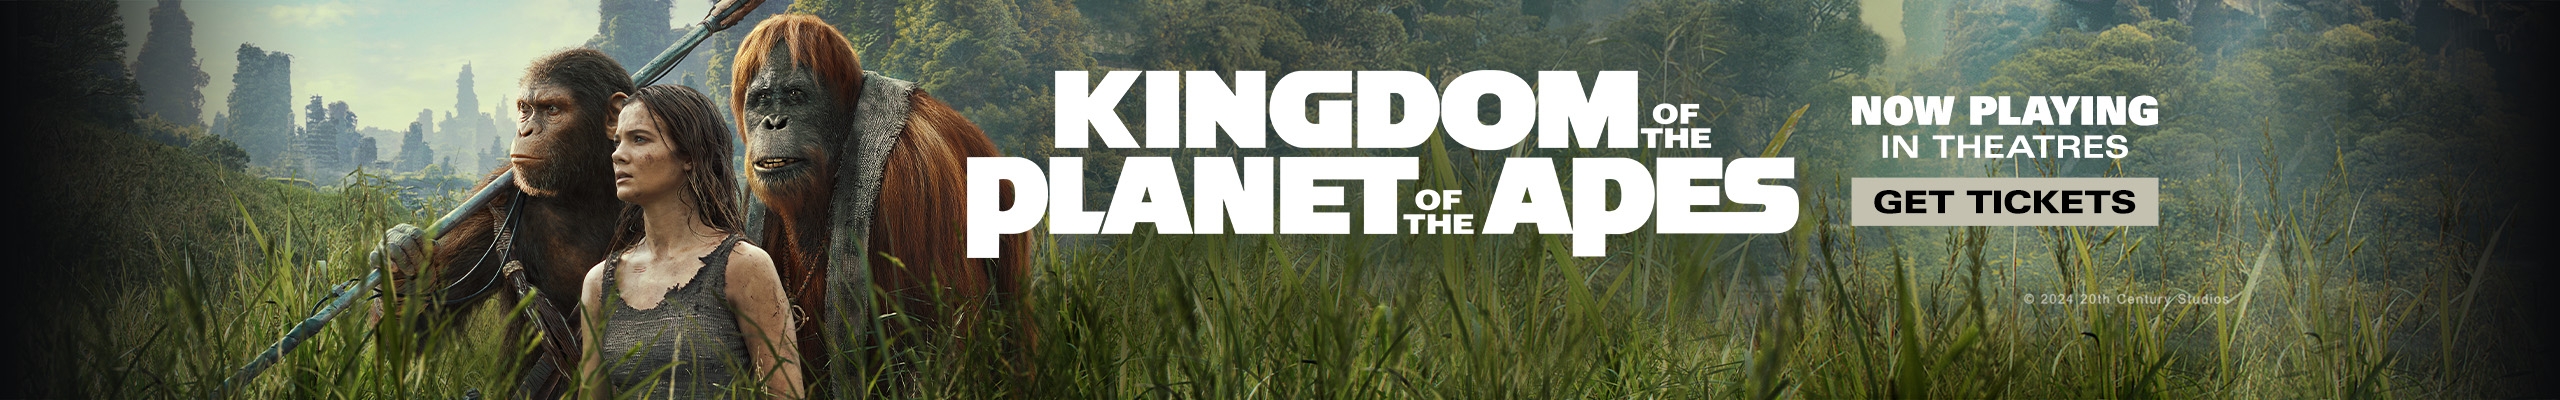 Kingdom of the planet of the apes. now playing in theatres. Get tickets.